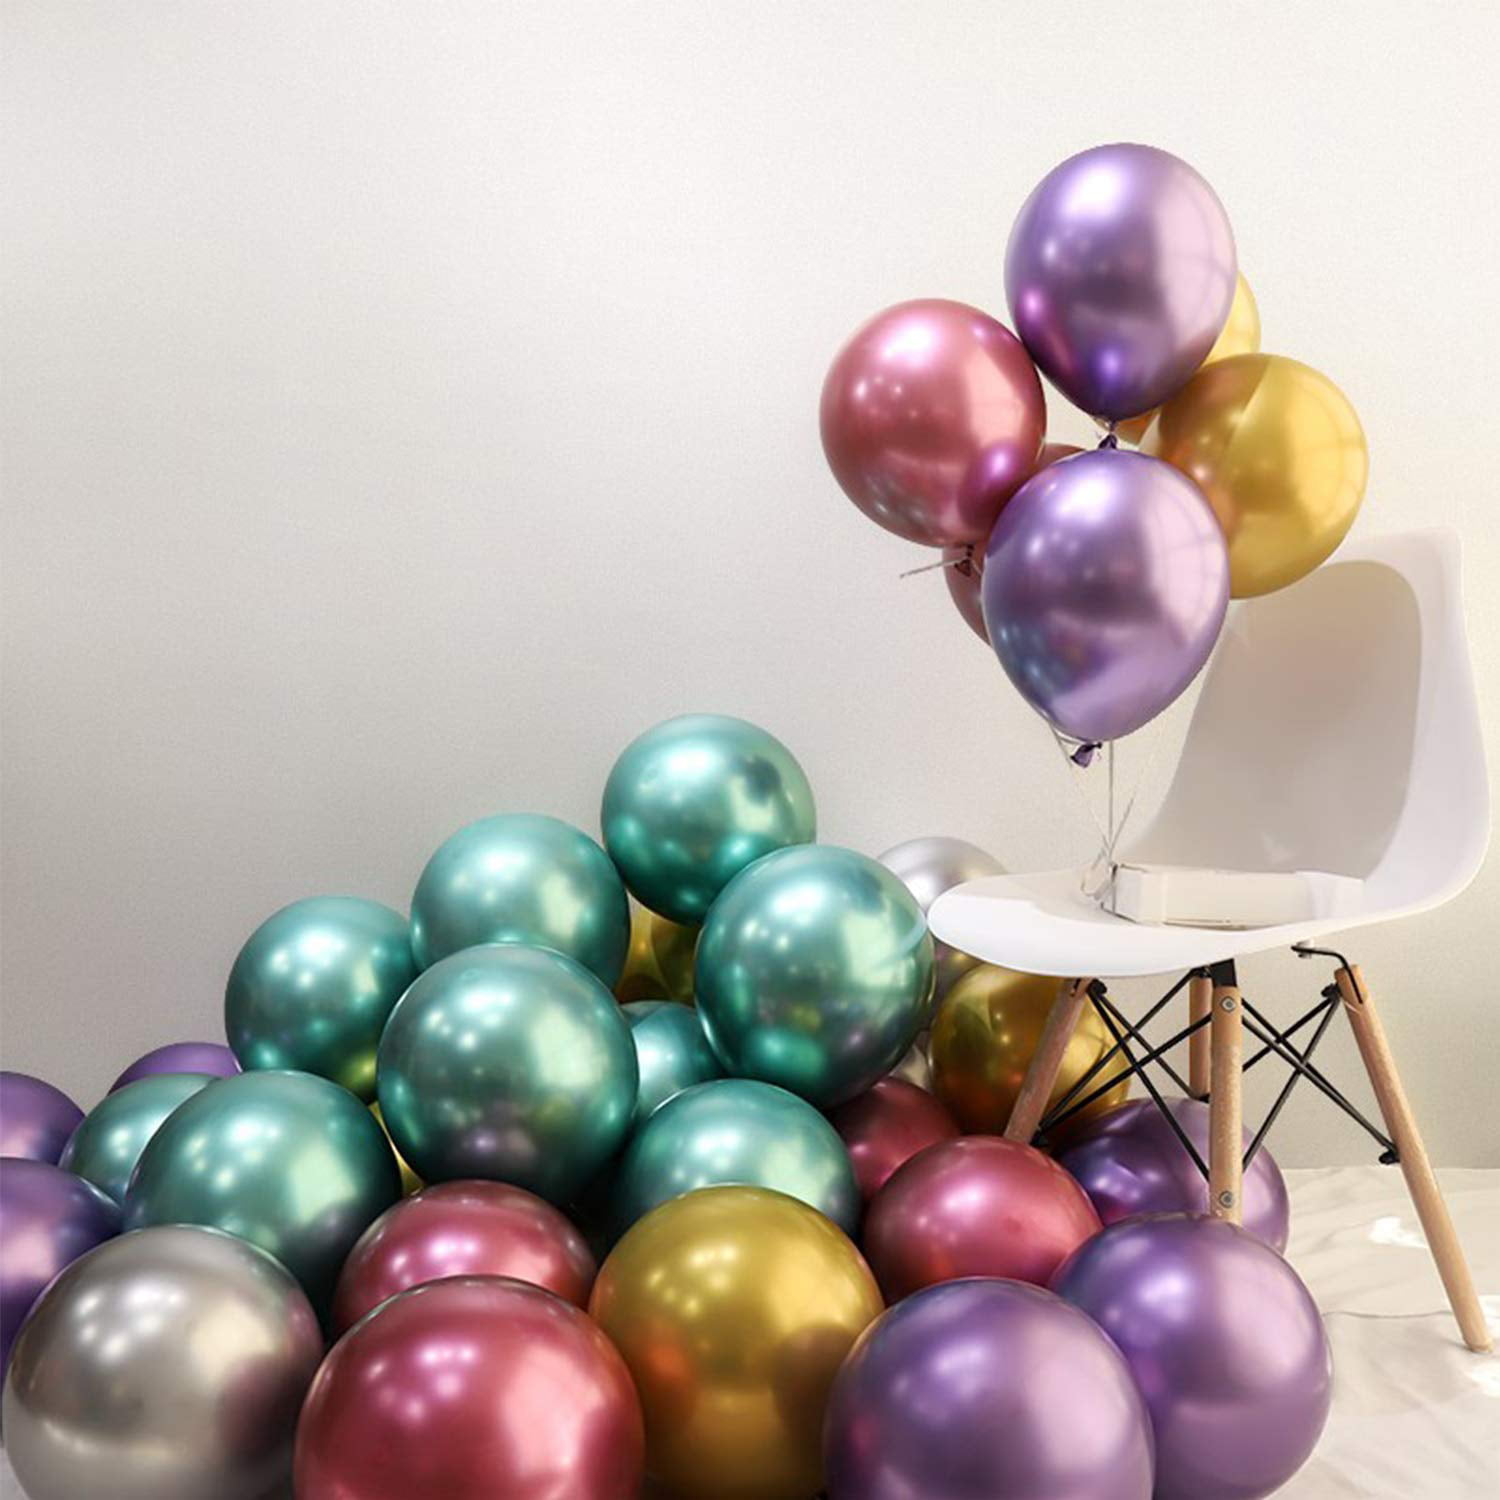 Details about   100 Metallic Pink Latex balloons Helium Quality Birthday Wedding party Decor 